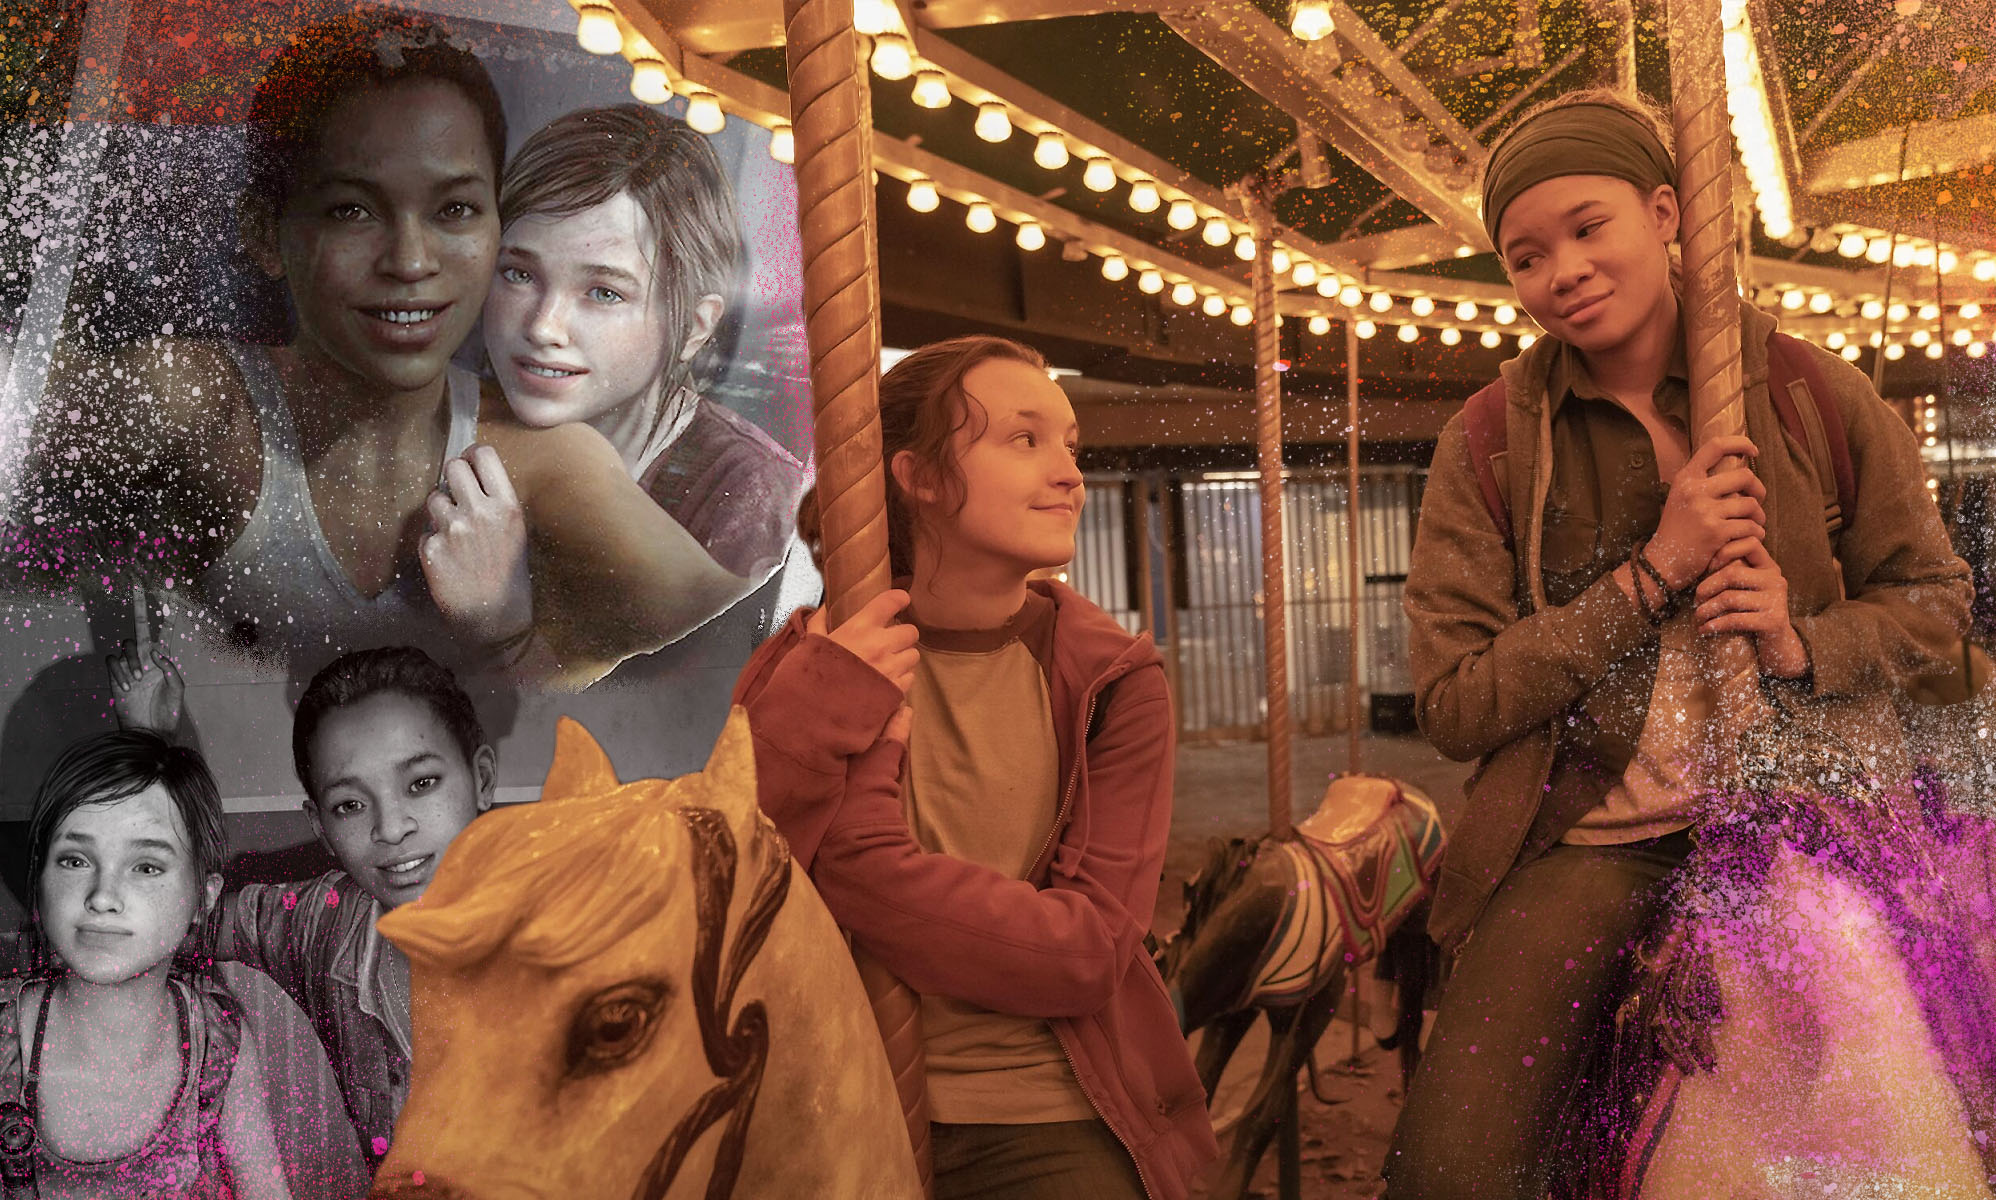 Bigots hate Ellie and Riley's romance in The Last of Us, but it's all in the video game